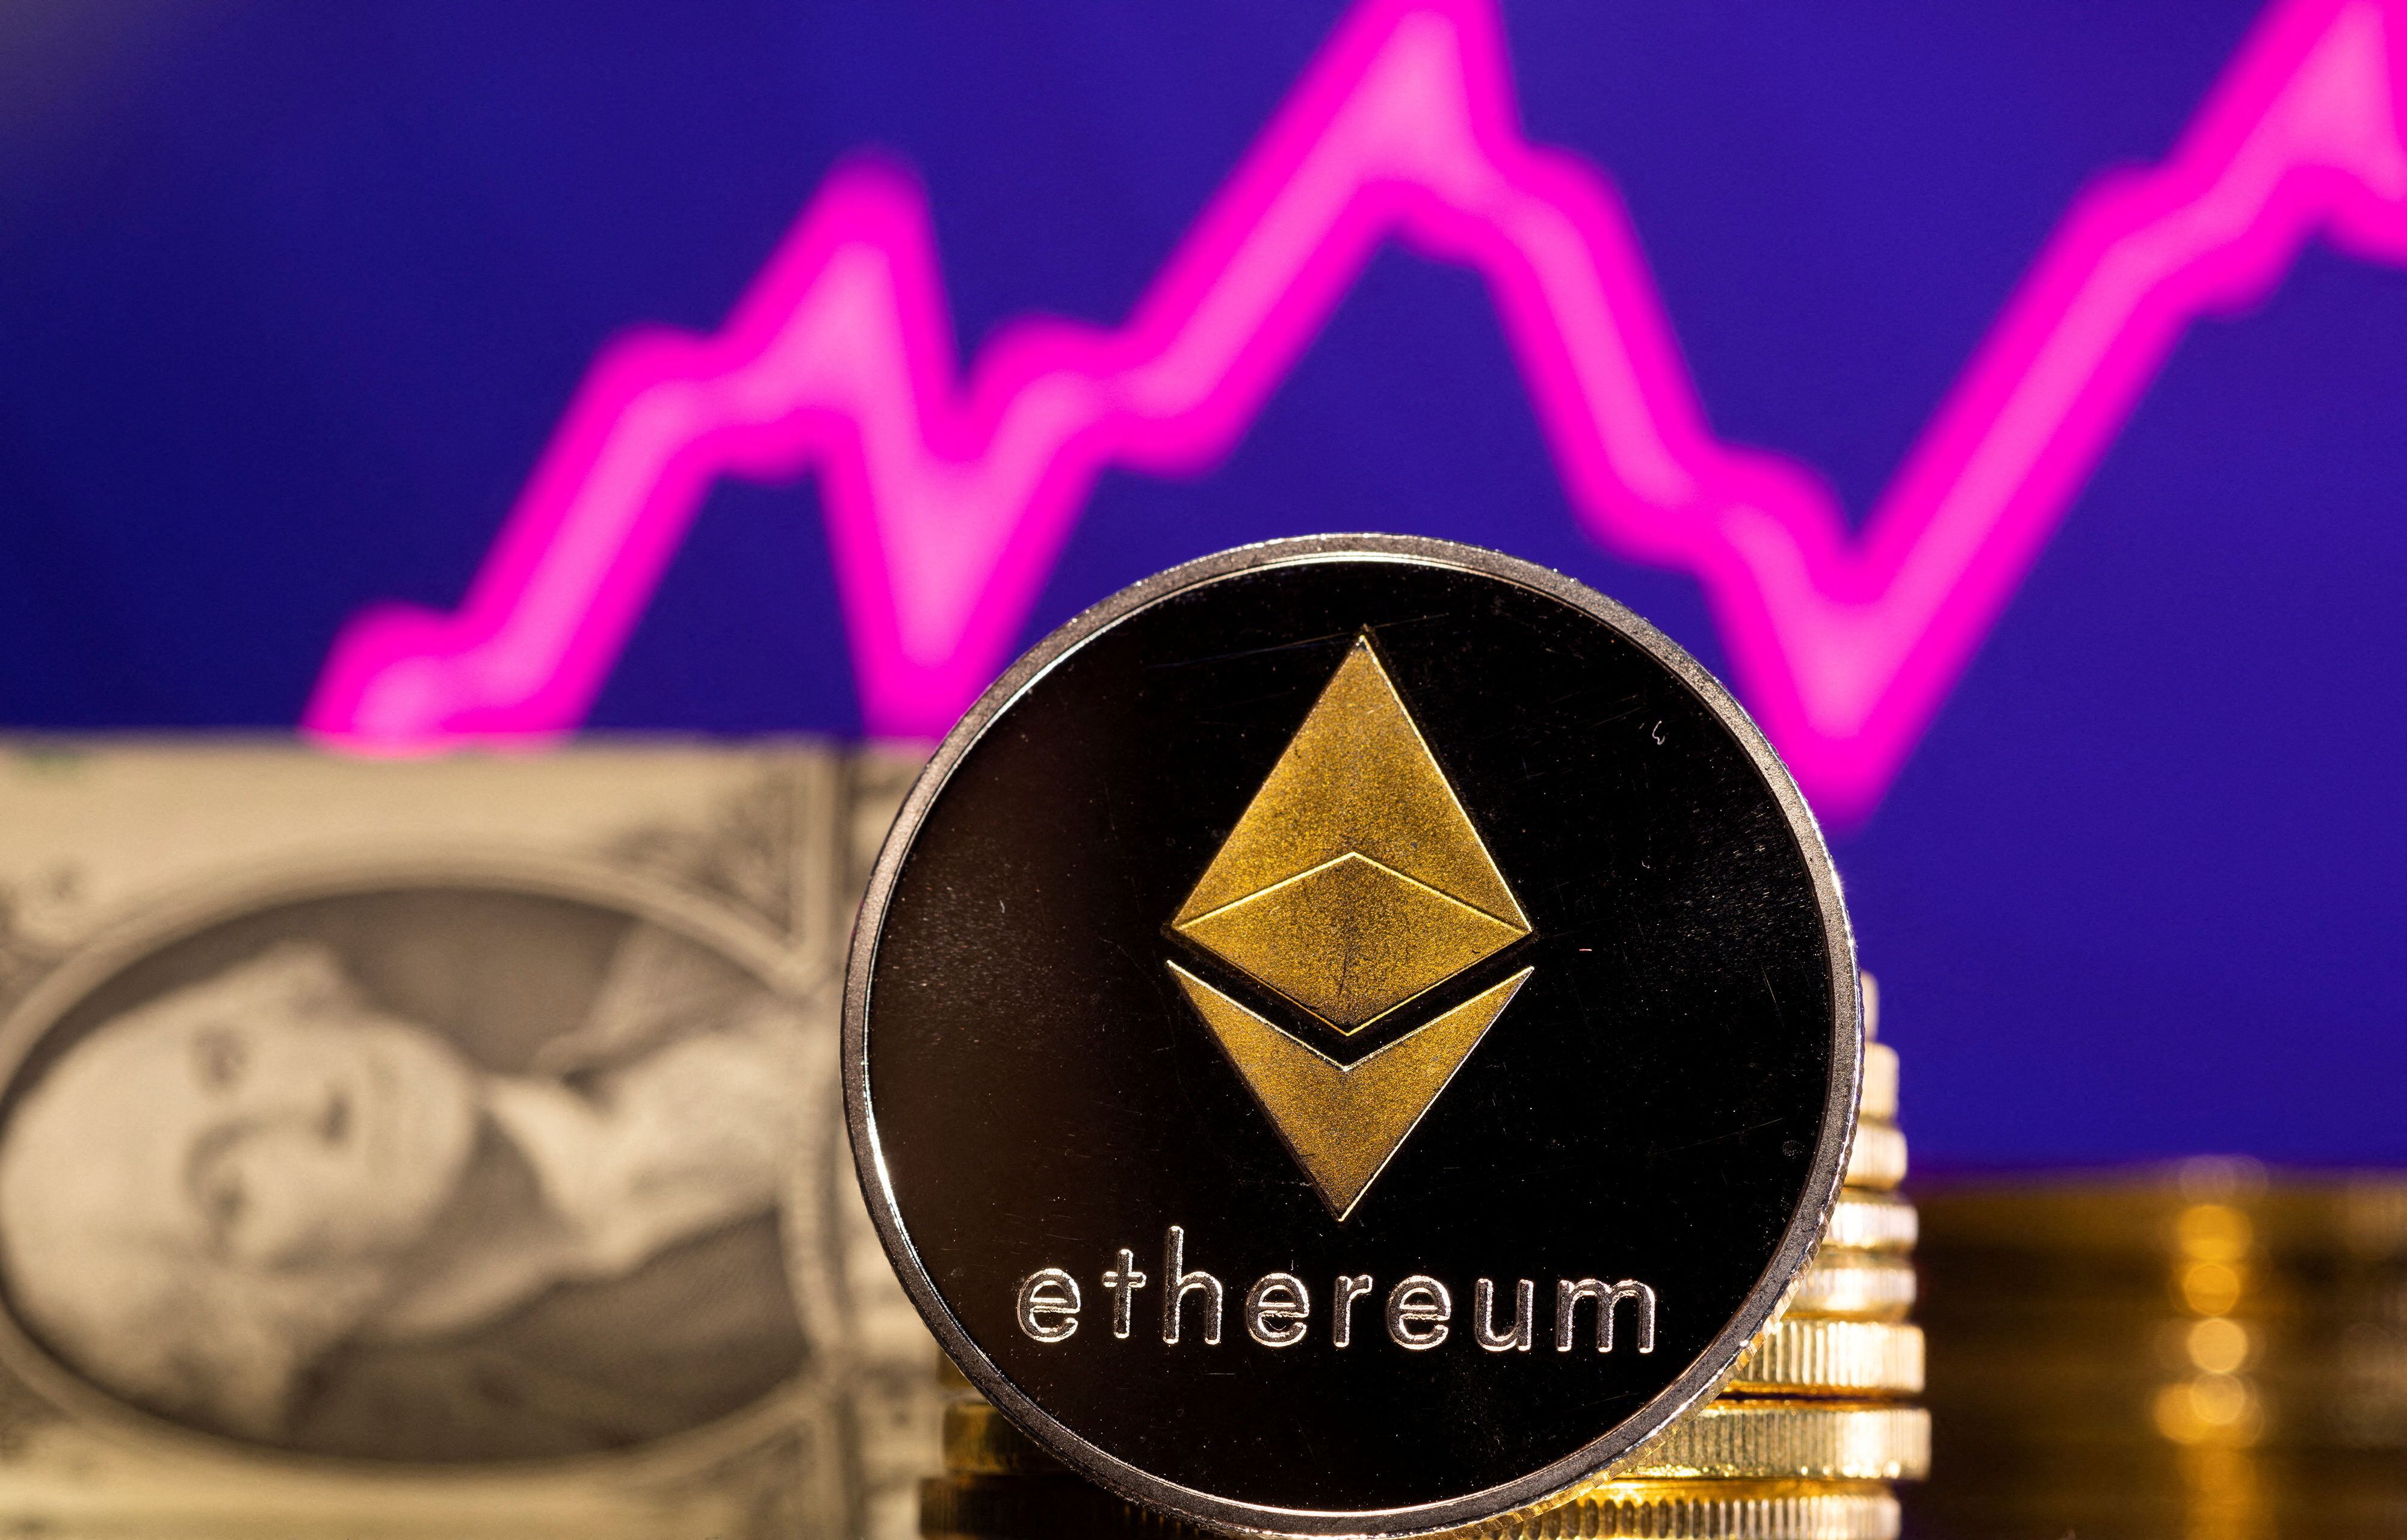 FILE PHOTO: A representations of cryptocurrency Ethereum is seen in front of a stock graph and U.S. dollar in this illustration taken, January 24, 2022. REUTERS/Dado Ruvic/File Photo